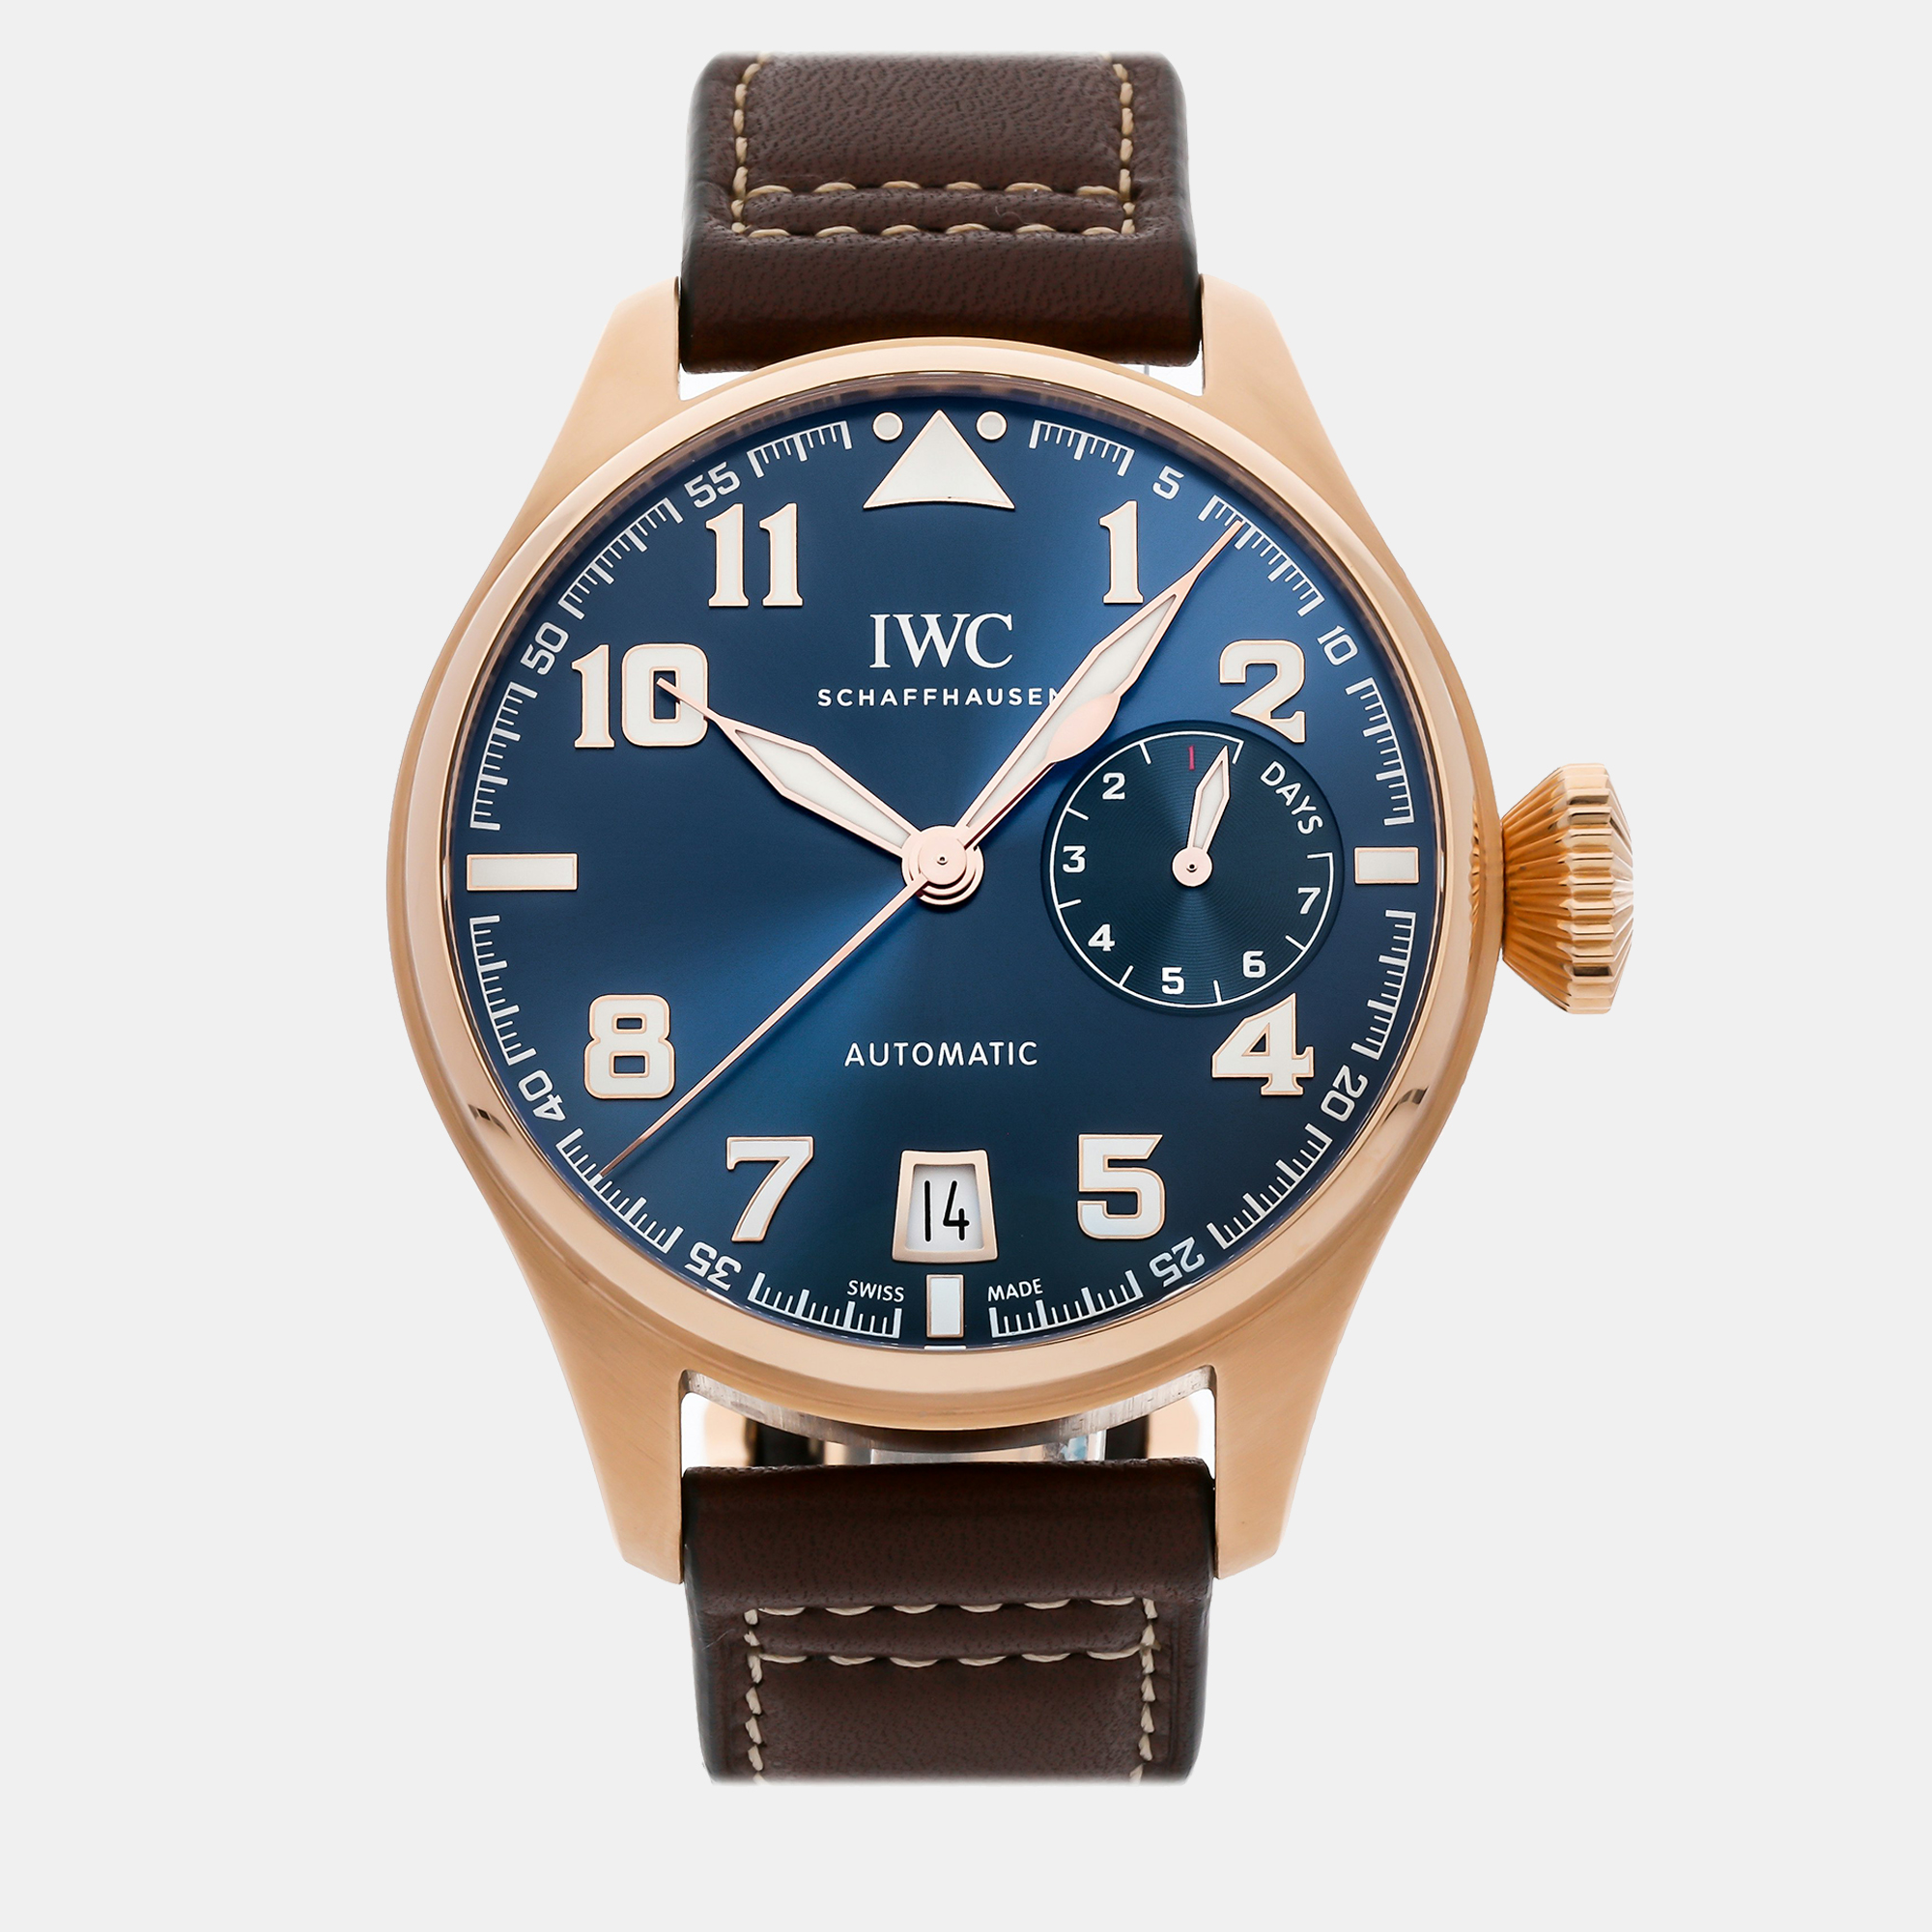 The charm of a finely crafted wristwatch accompanies the wearer through the years and to any occasion they have a date for. It is this charm infused with timeless luxury that makes this IWC wristwatch such an incredible pick.